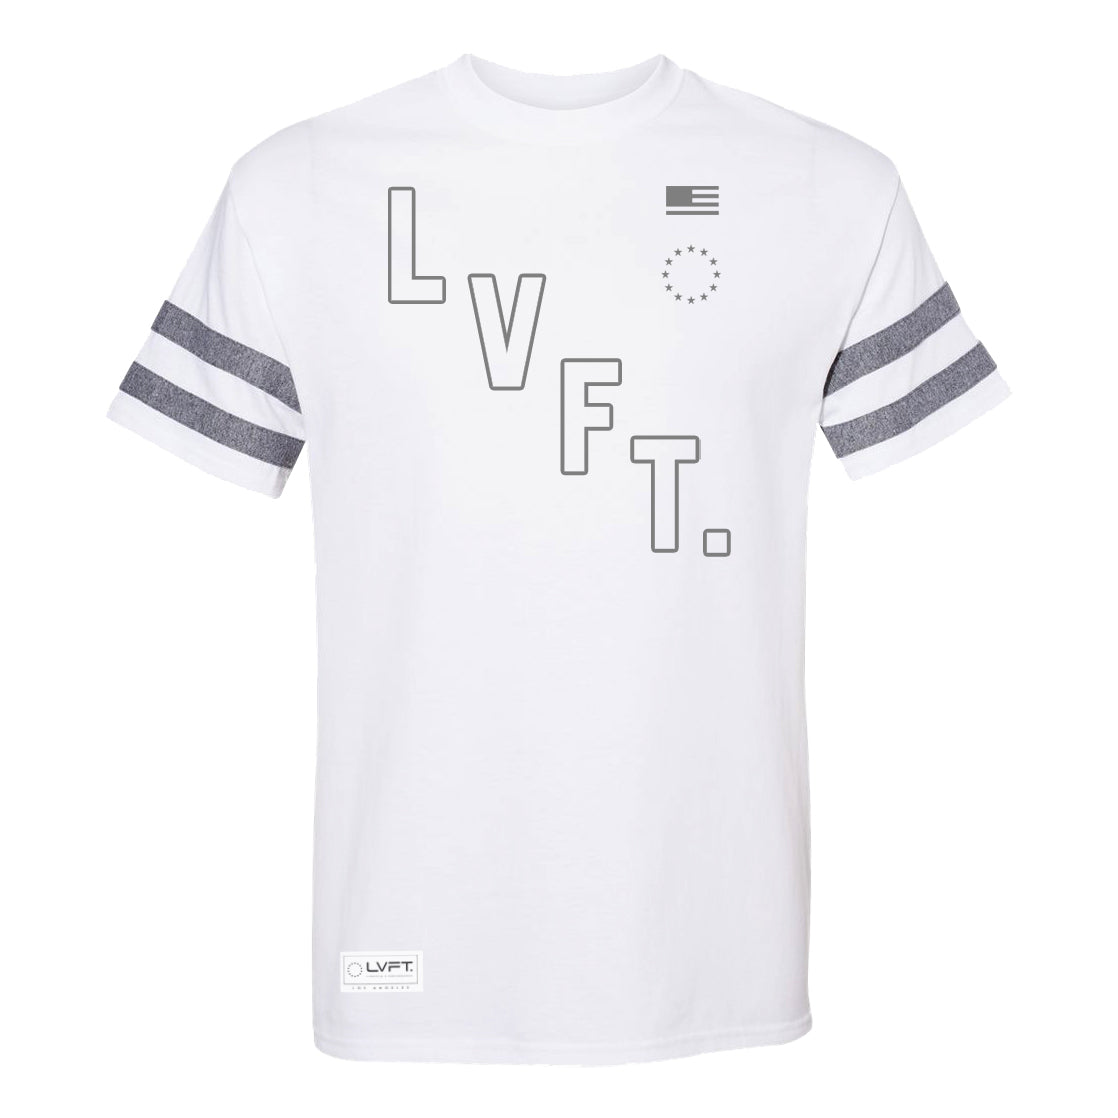 White All Star T-Shirt with Roster